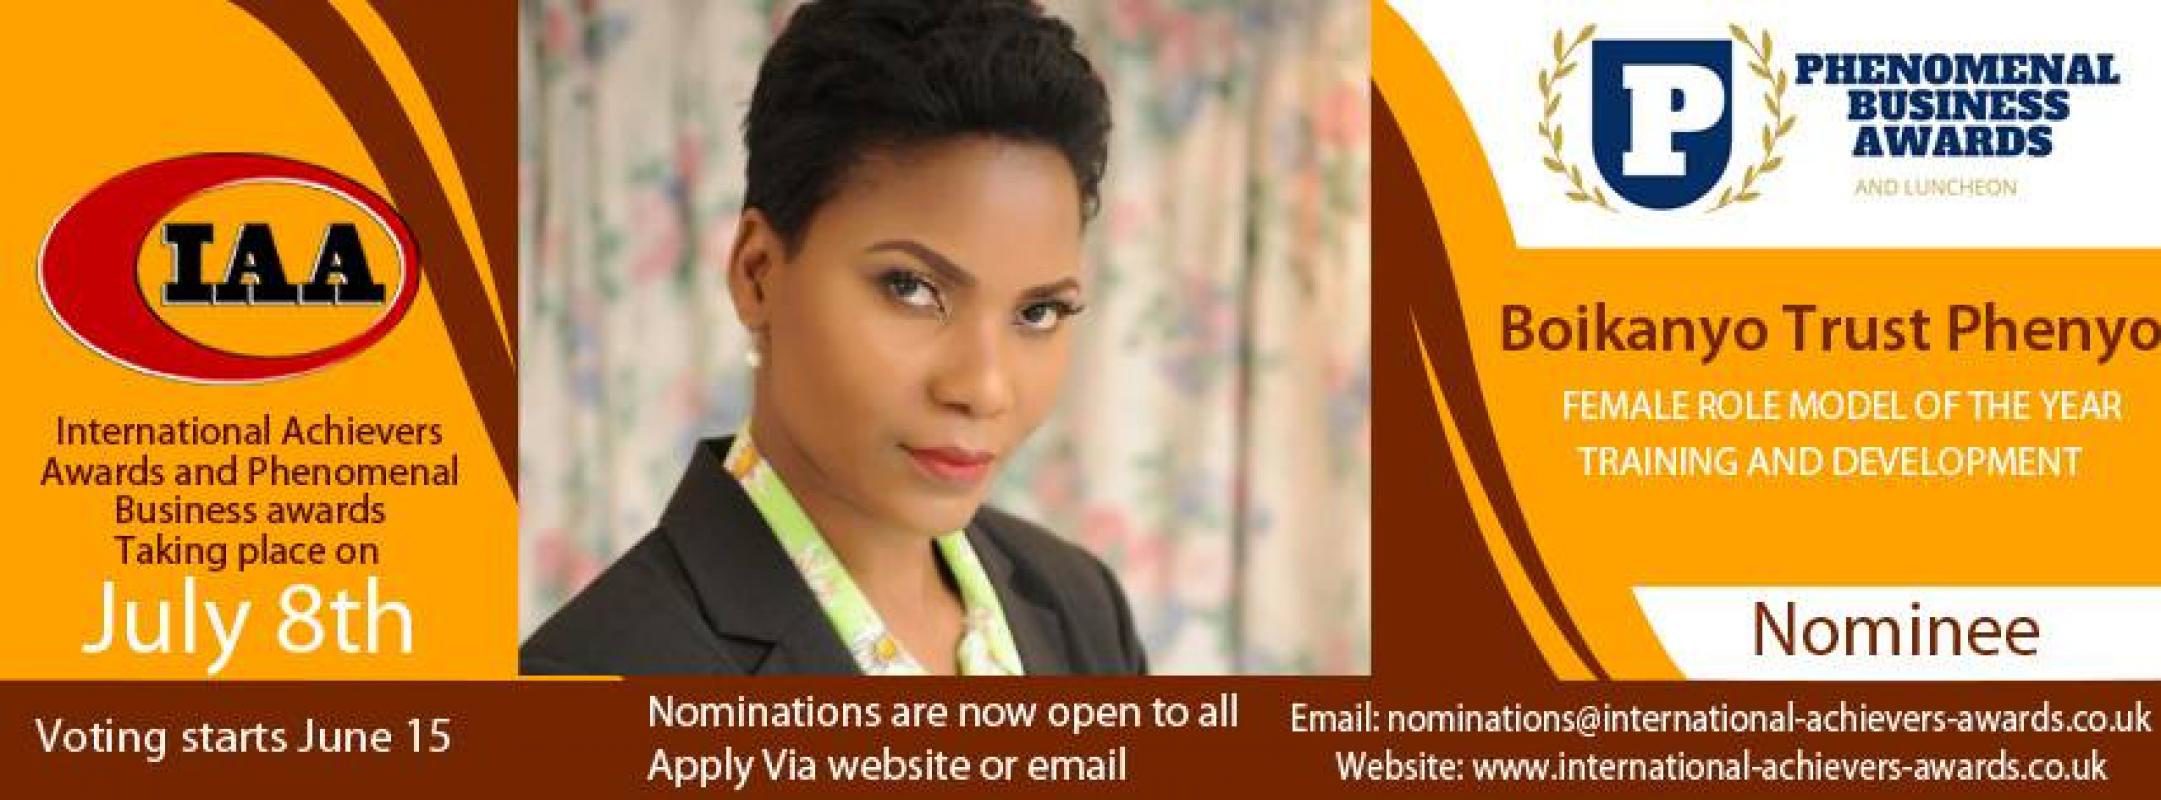 Nominee for Phenominal Business Awards 2017